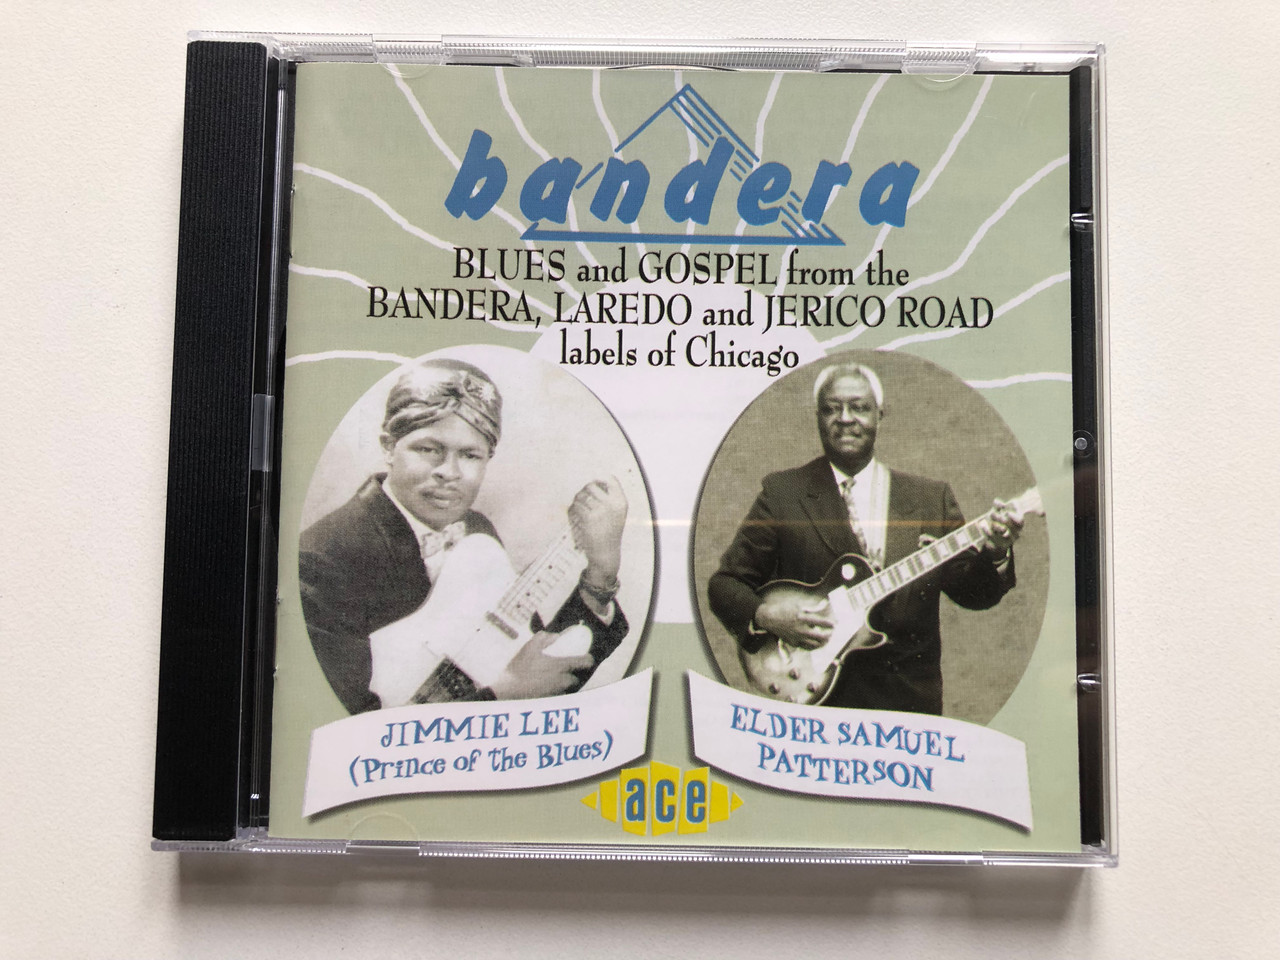 https://cdn10.bigcommerce.com/s-62bdpkt7pb/products/0/images/307550/Bandera_Blues_And_Gospel_From_The_Bandera_Laredo_And_Jerico_Road_Labels_Of_Chicago_Ace_Audio_CD_2001_CDCHD_808_1__83408.1698742048.1280.1280.JPG?c=2